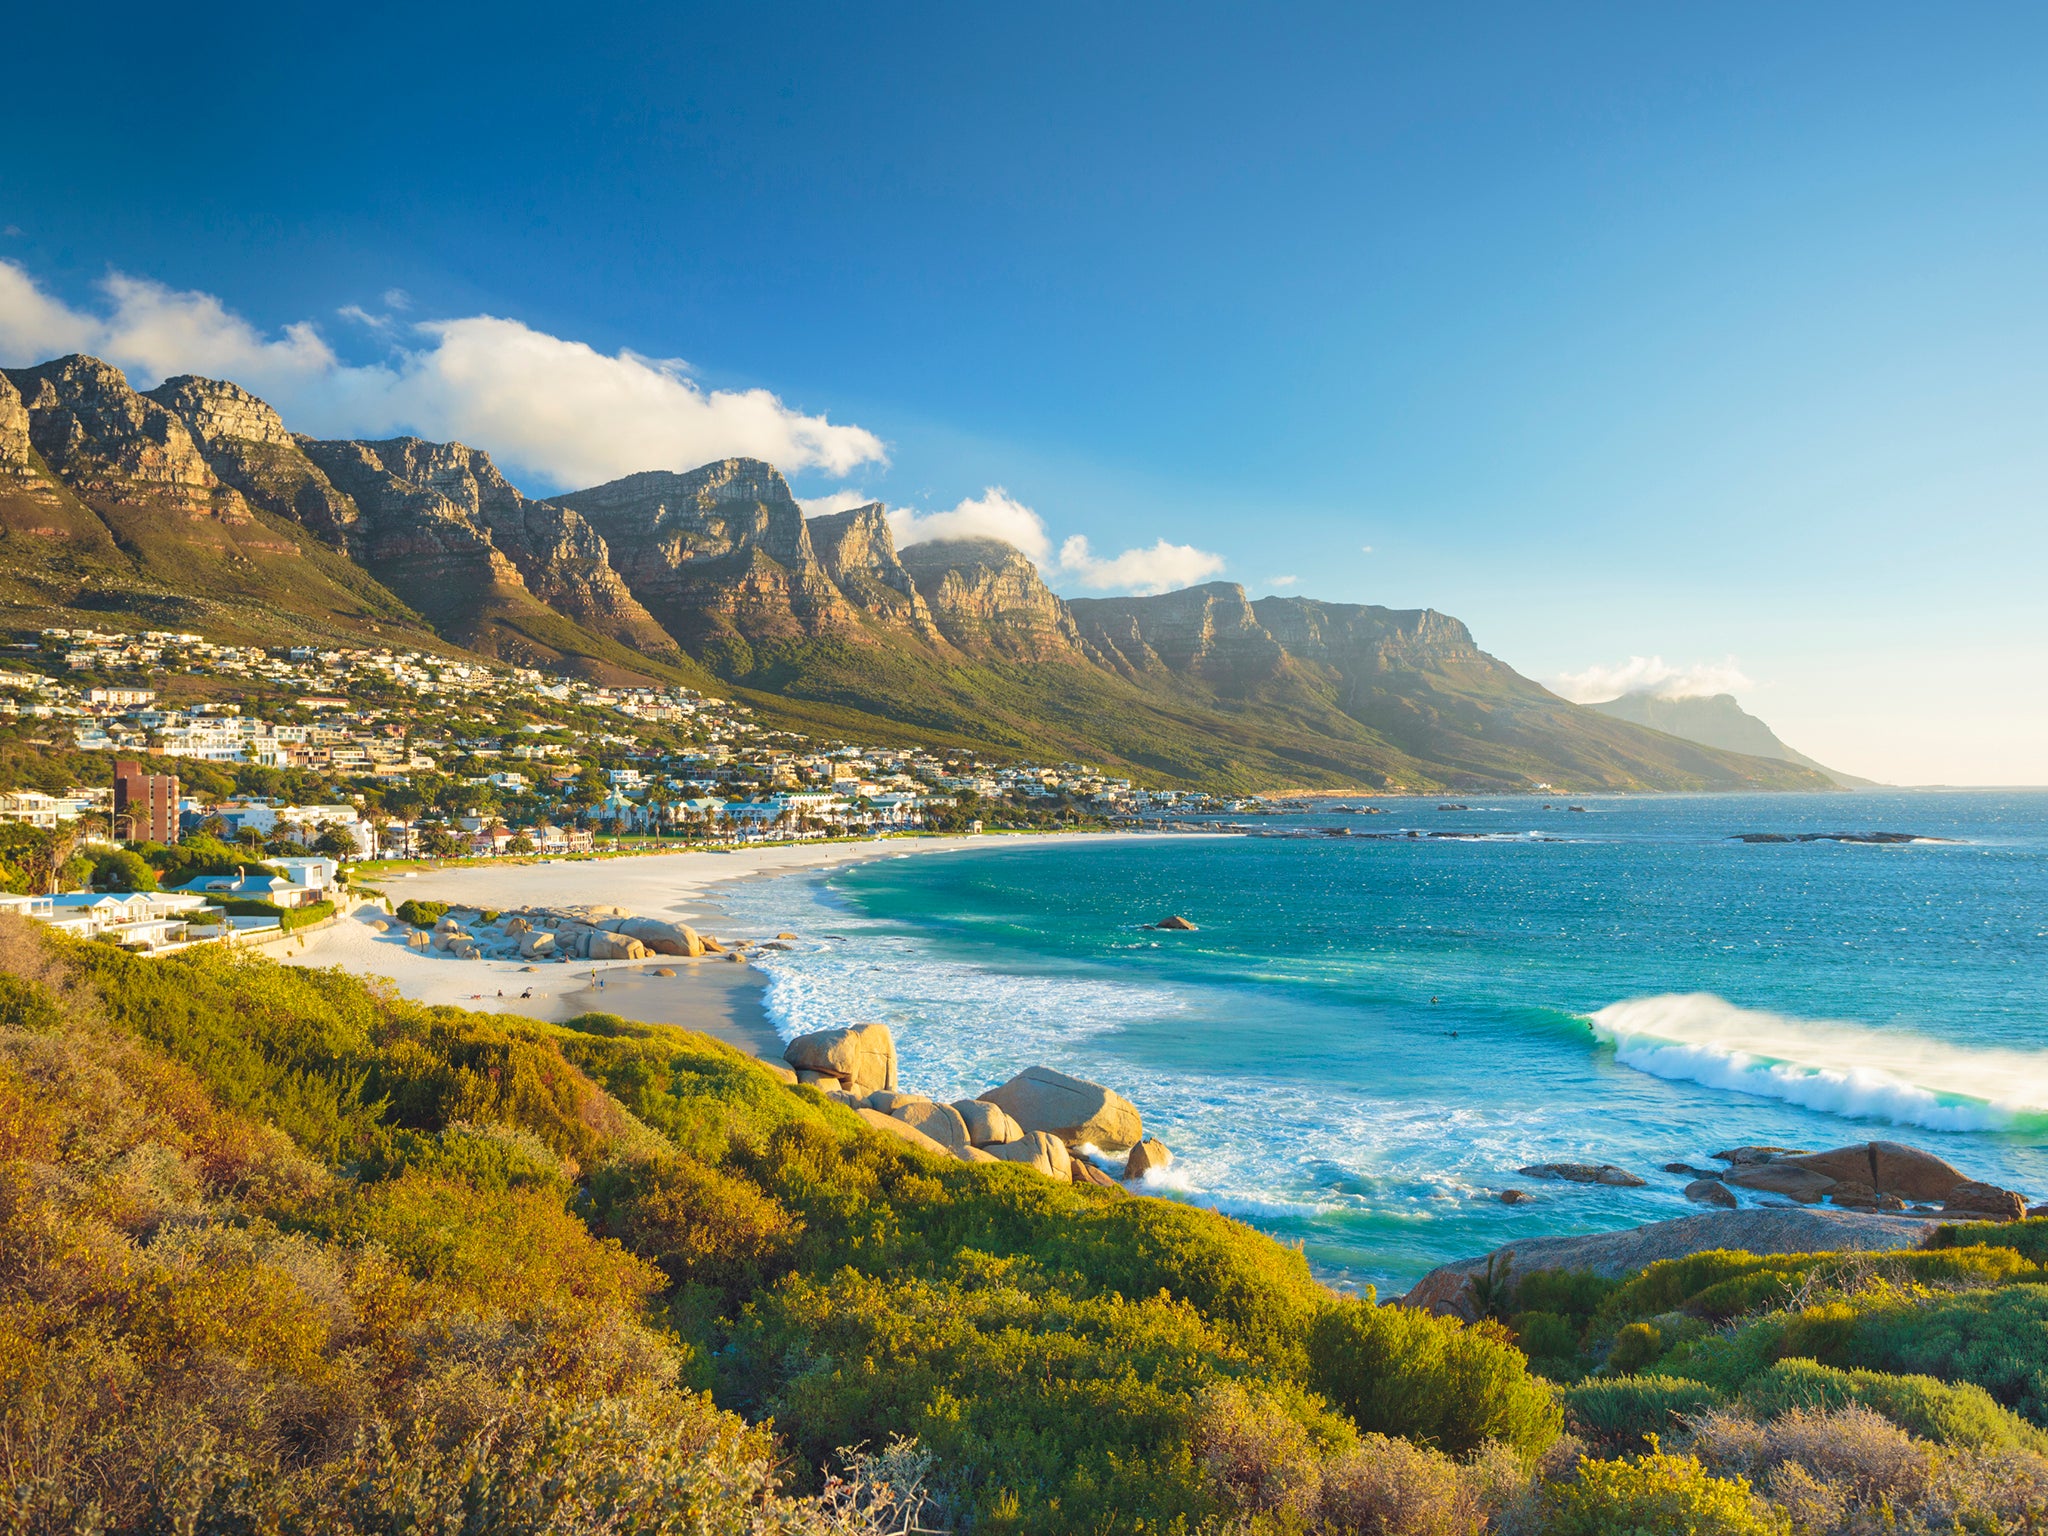 South Africa travel guide: Everything you need to know before you